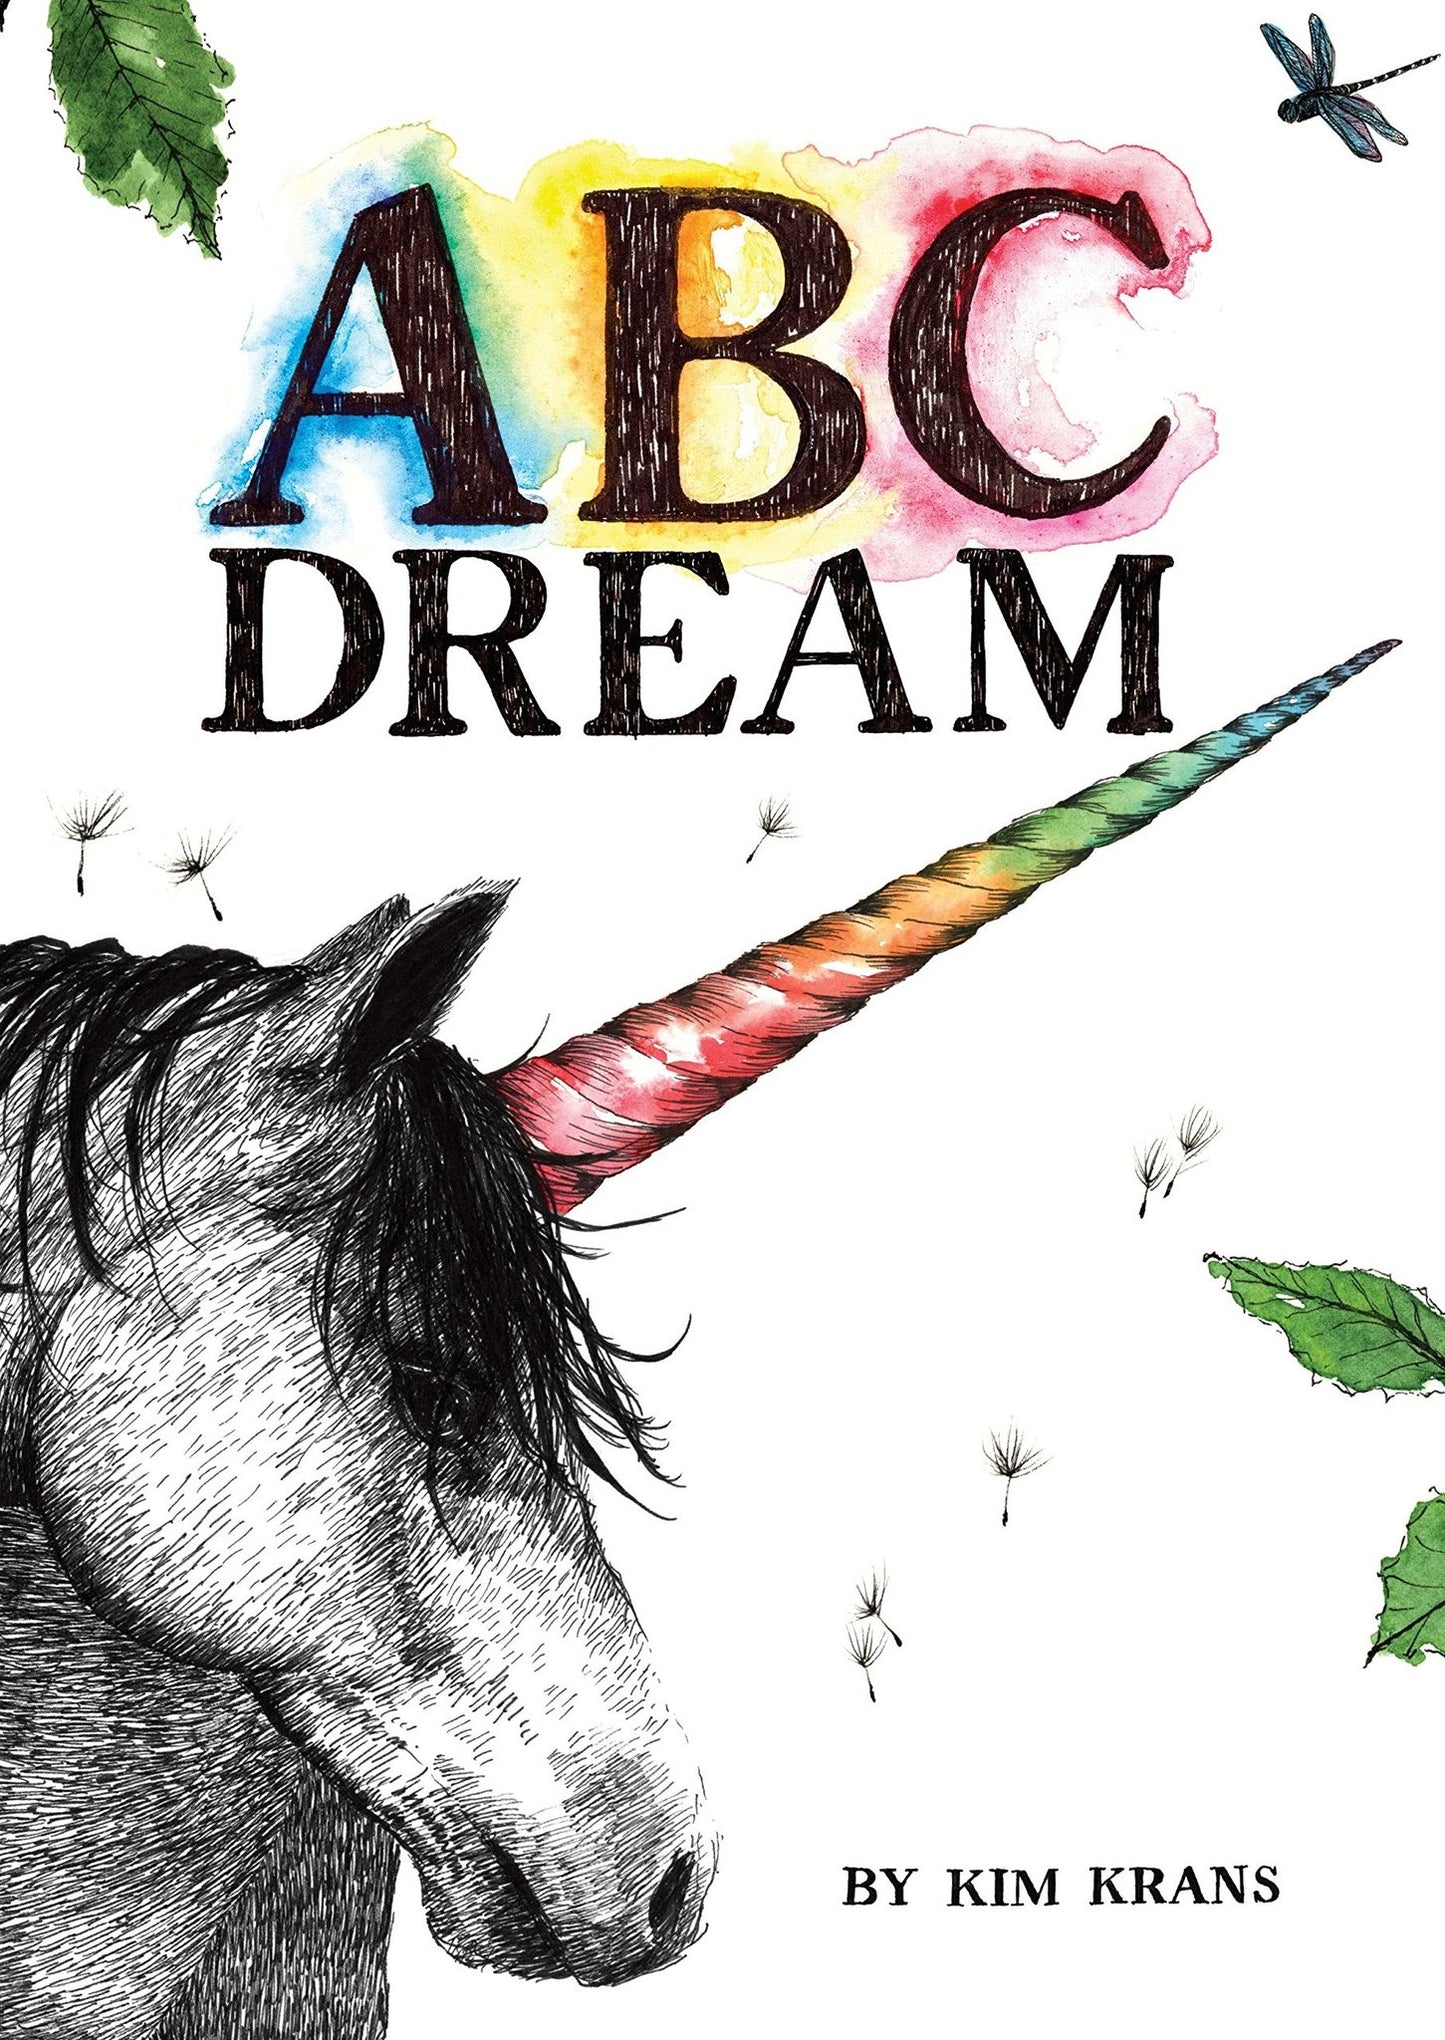 Cover of ABC Dream book by Kim Krans.